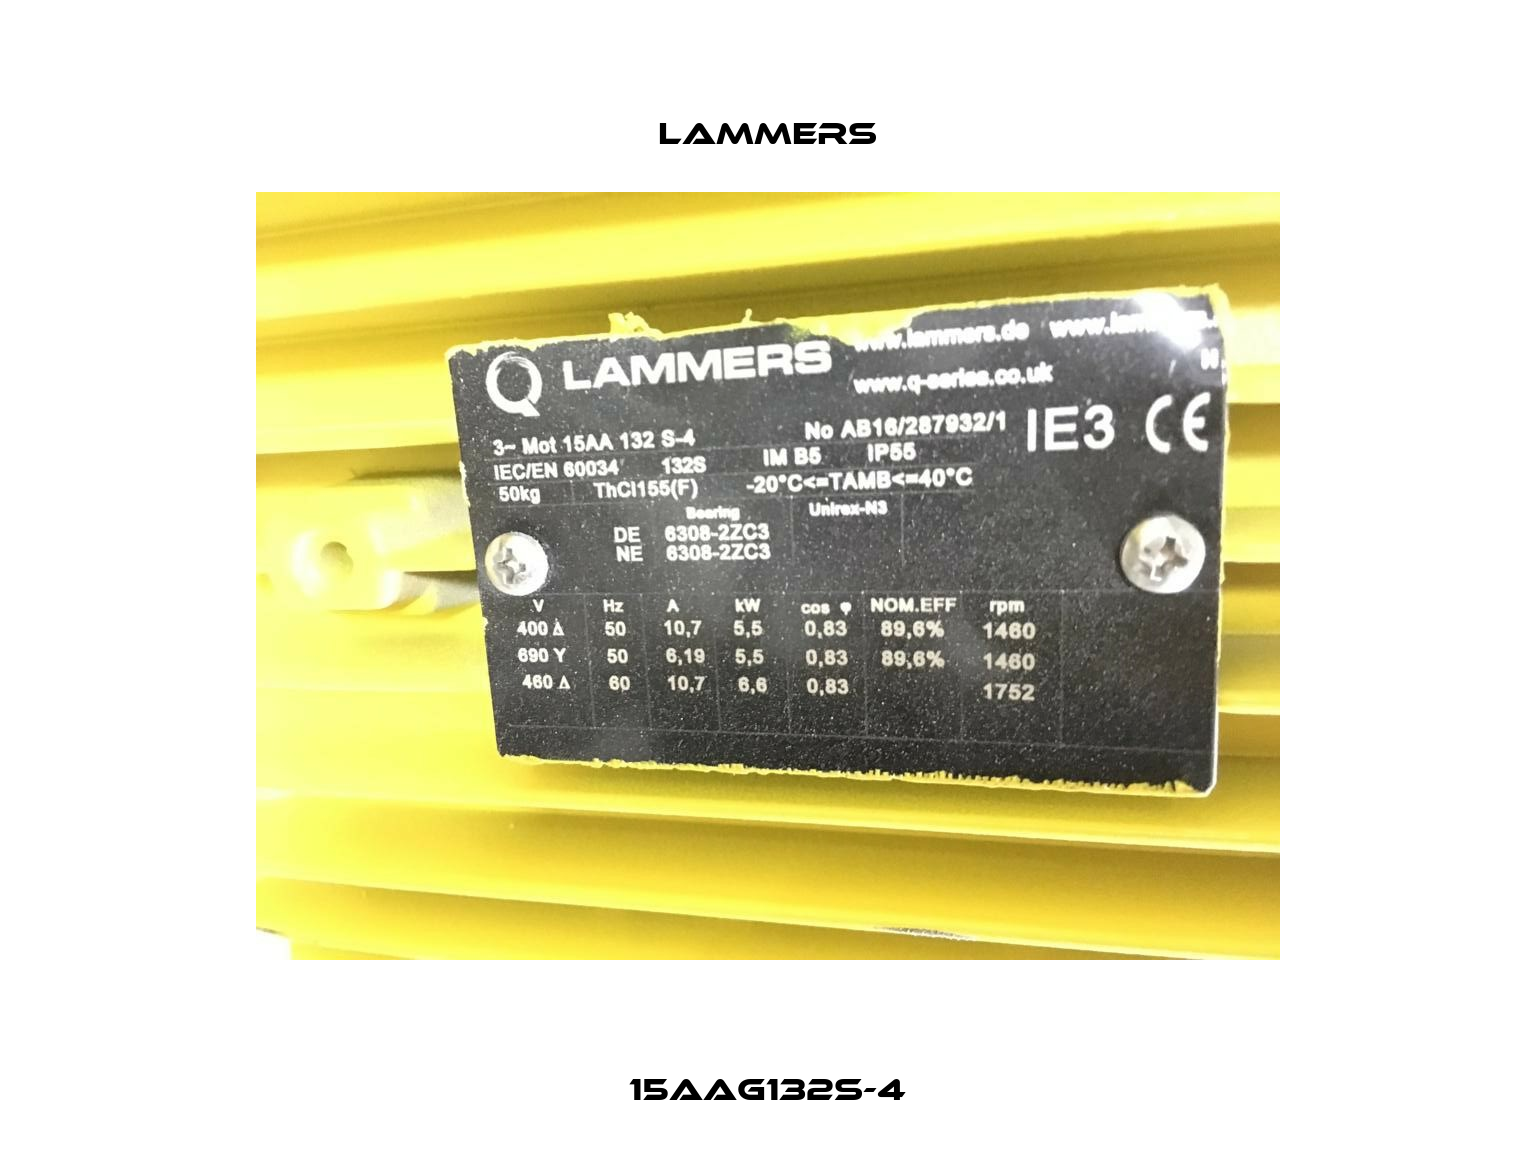 15AAG132S-4 Lammers